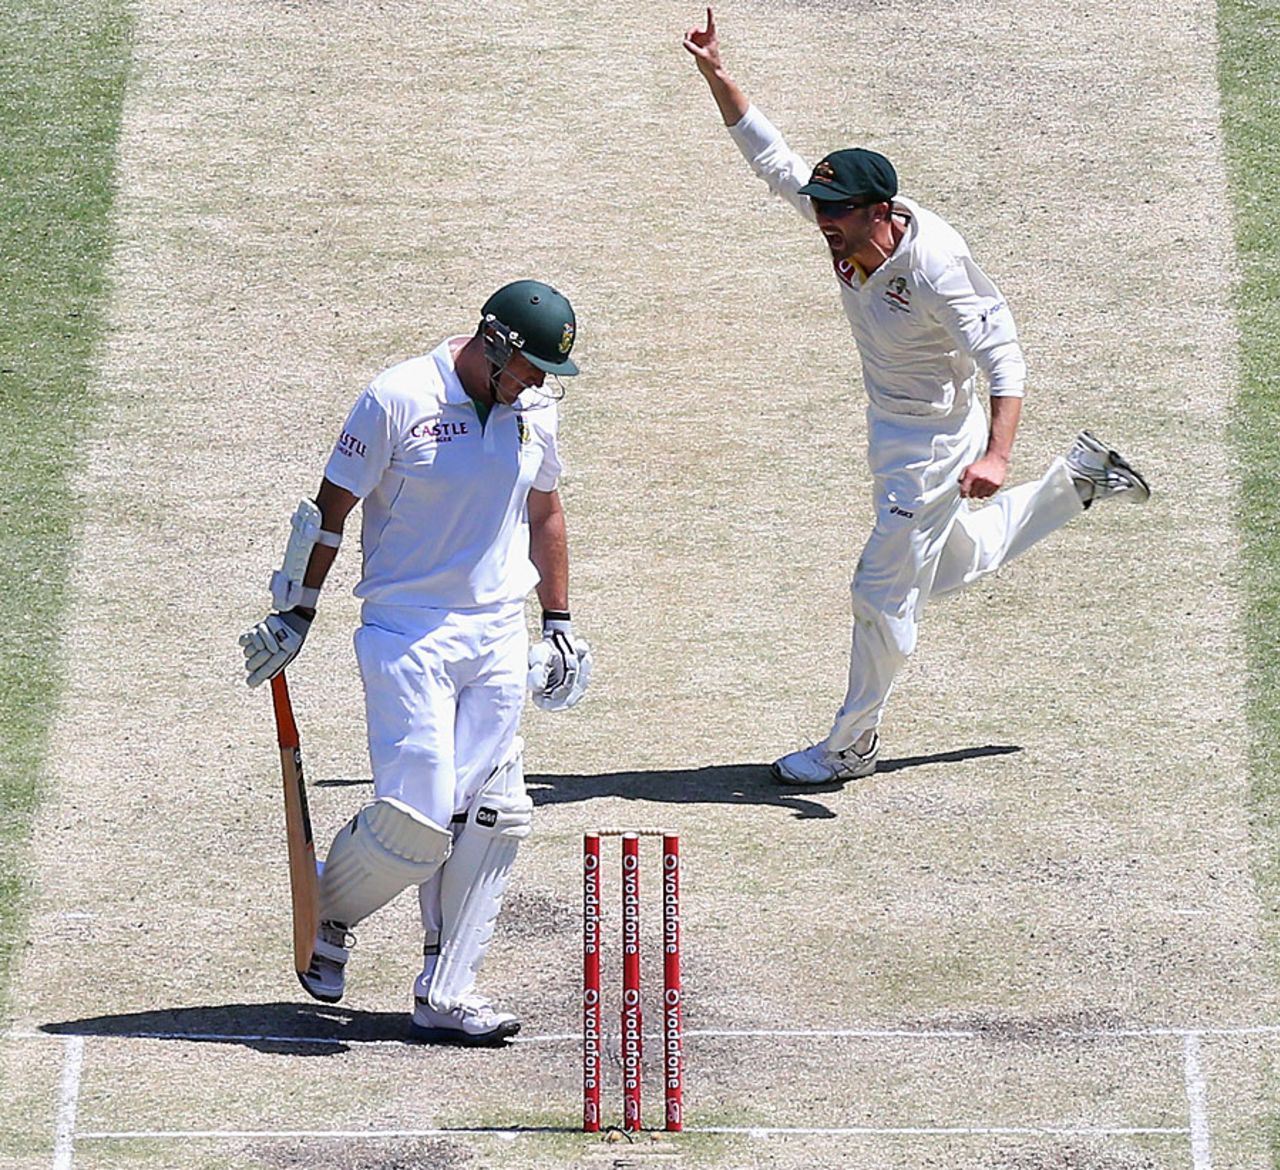 Ed Cowan runs across the pitch in celebration after Graeme Smith departs, Australia v South Africa, 1st Test, Brisbane, 5th day, November 13, 2012